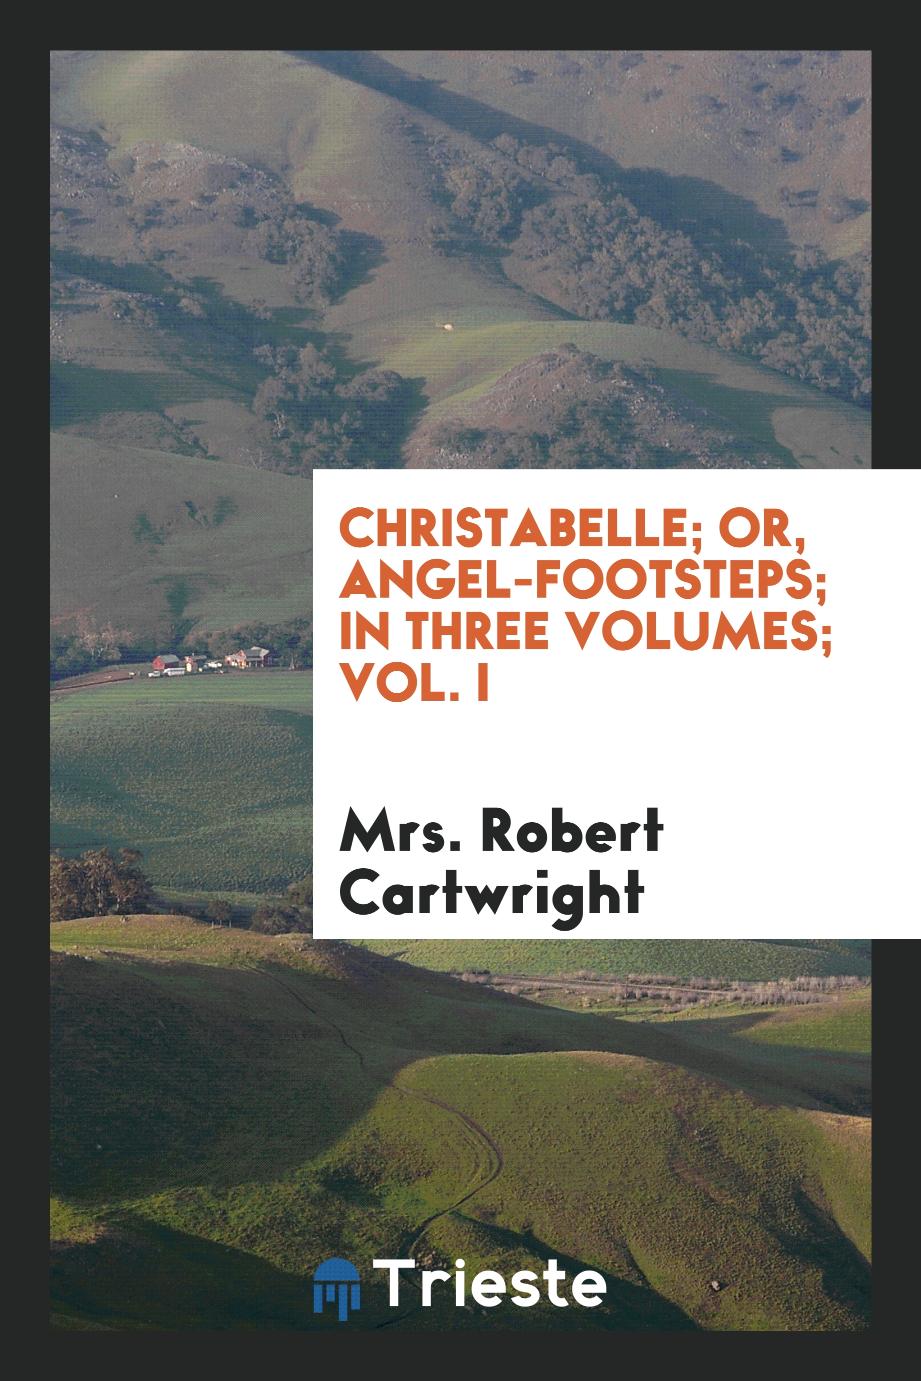 Christabelle; or, Angel-footsteps; in three volumes; Vol. I